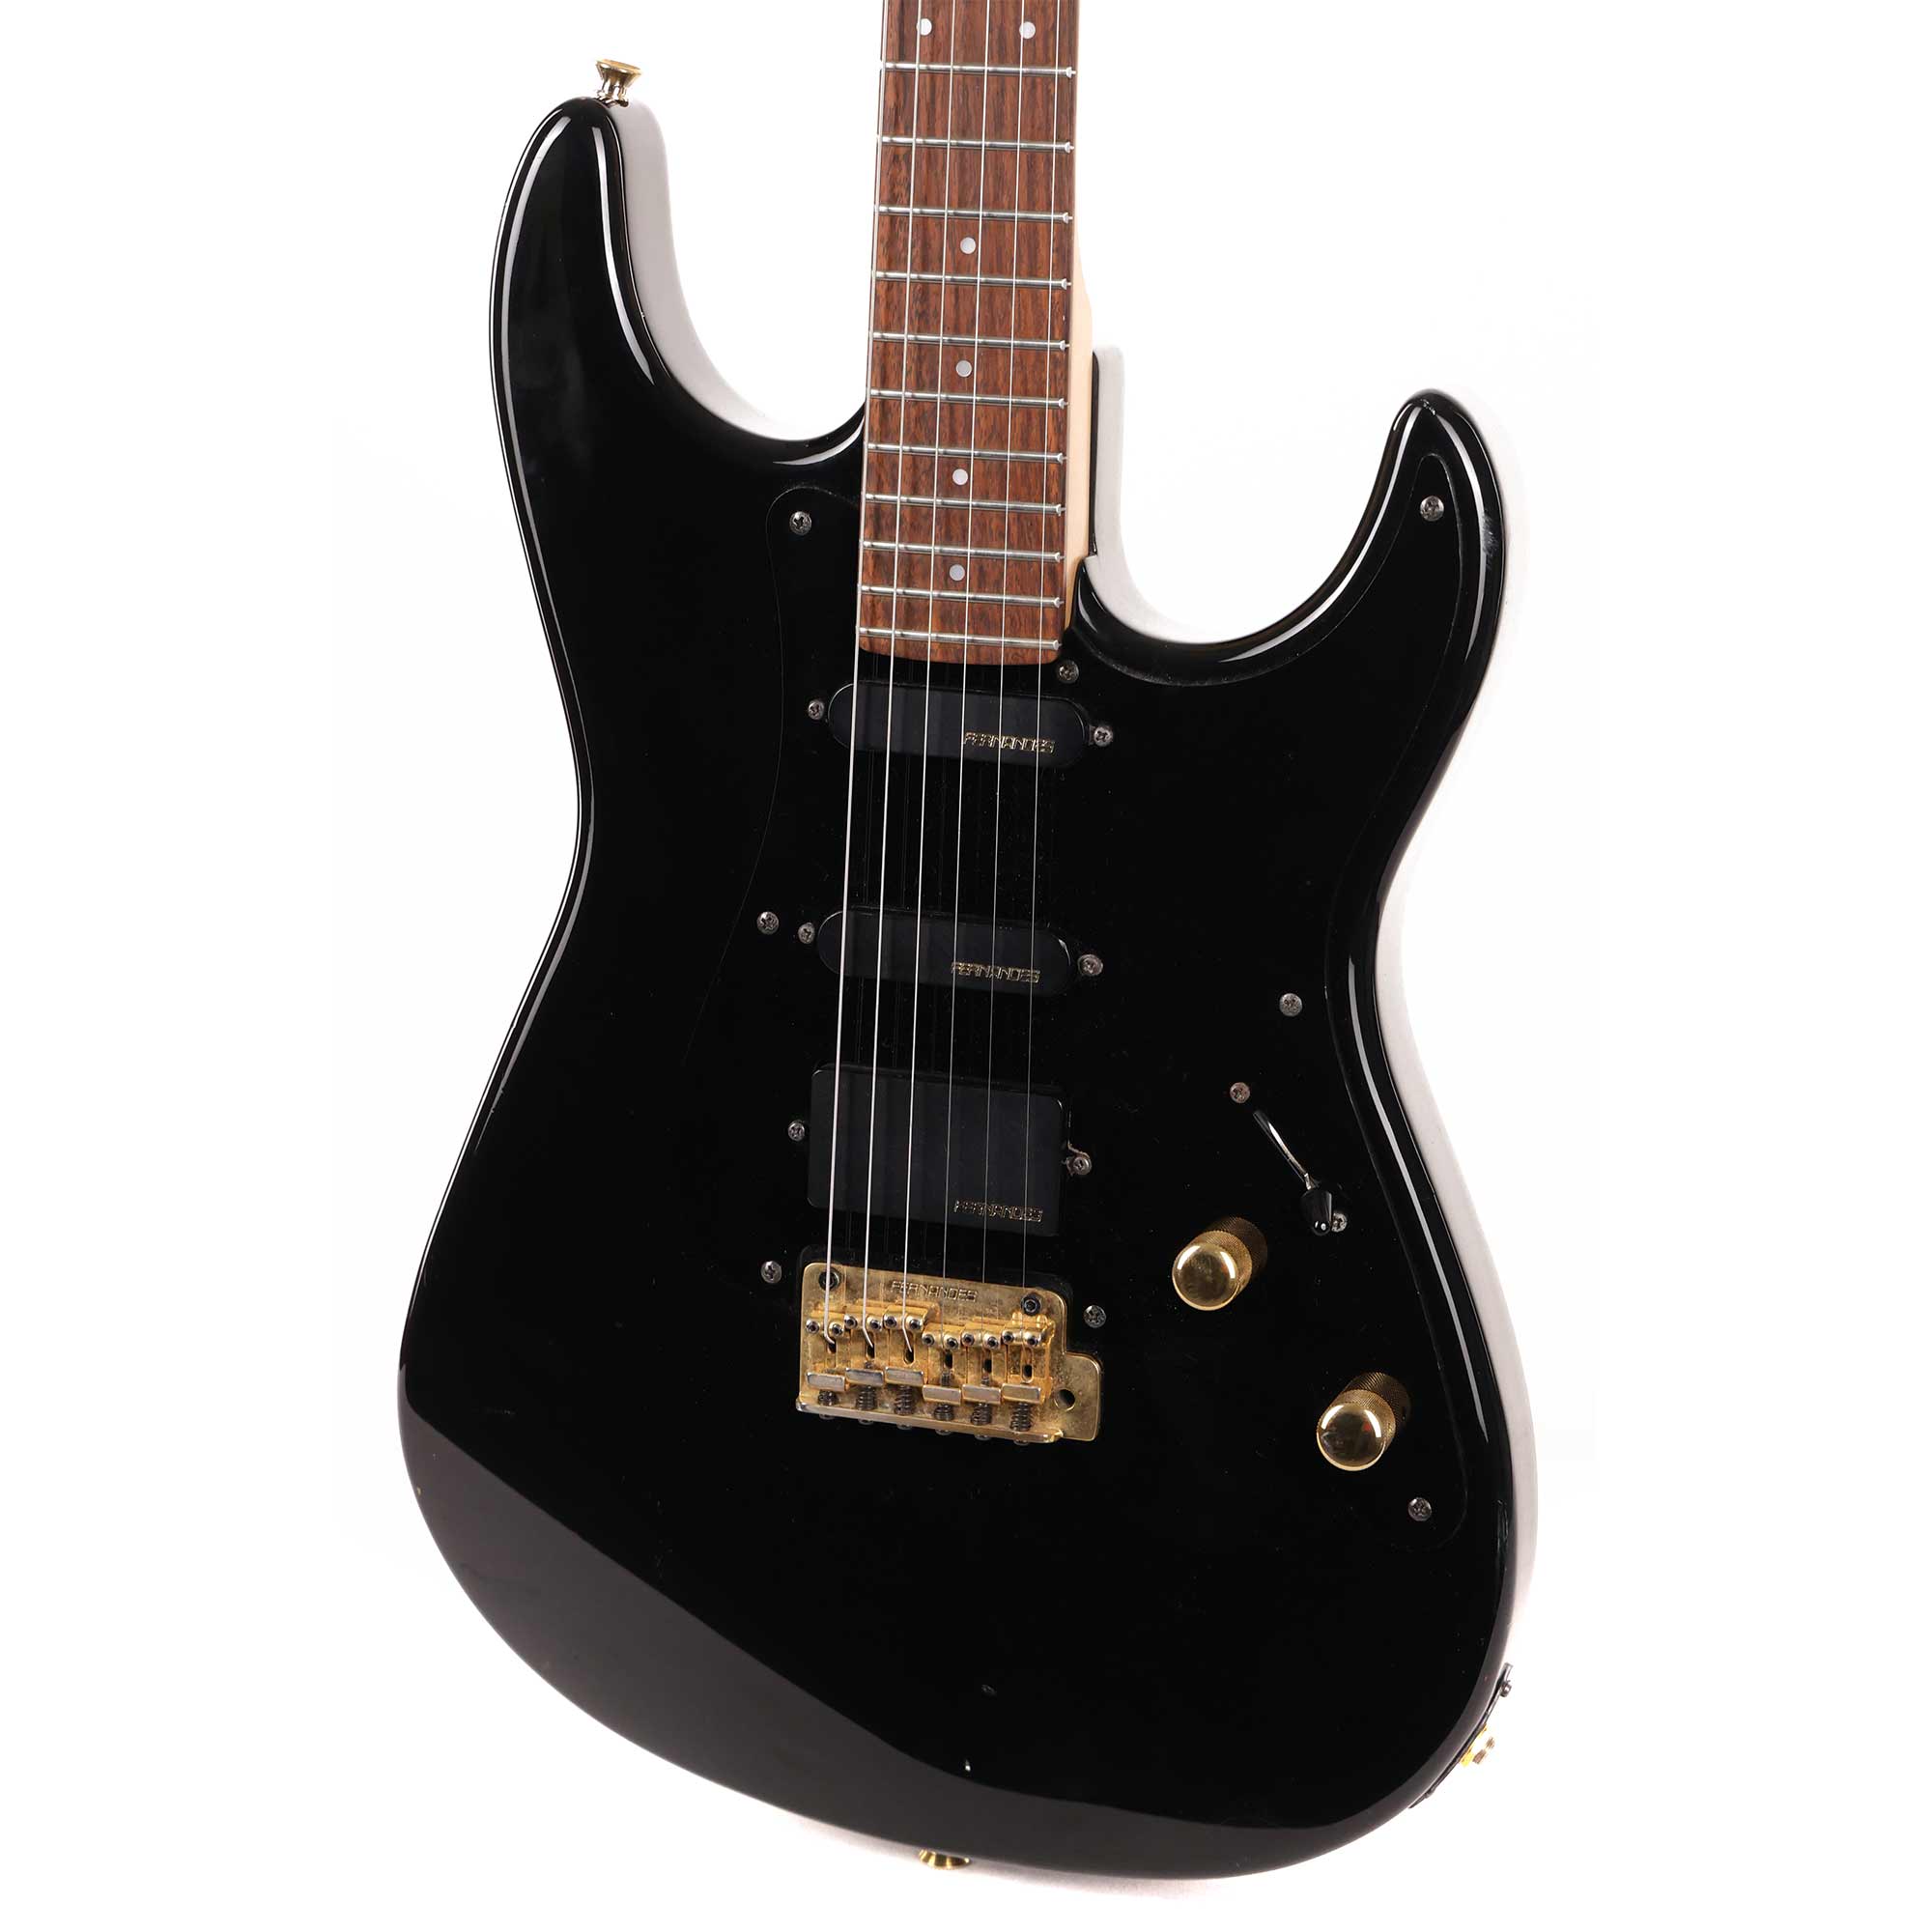 Fernandes The Function Made in Japan Guitar Black | The Music Zoo